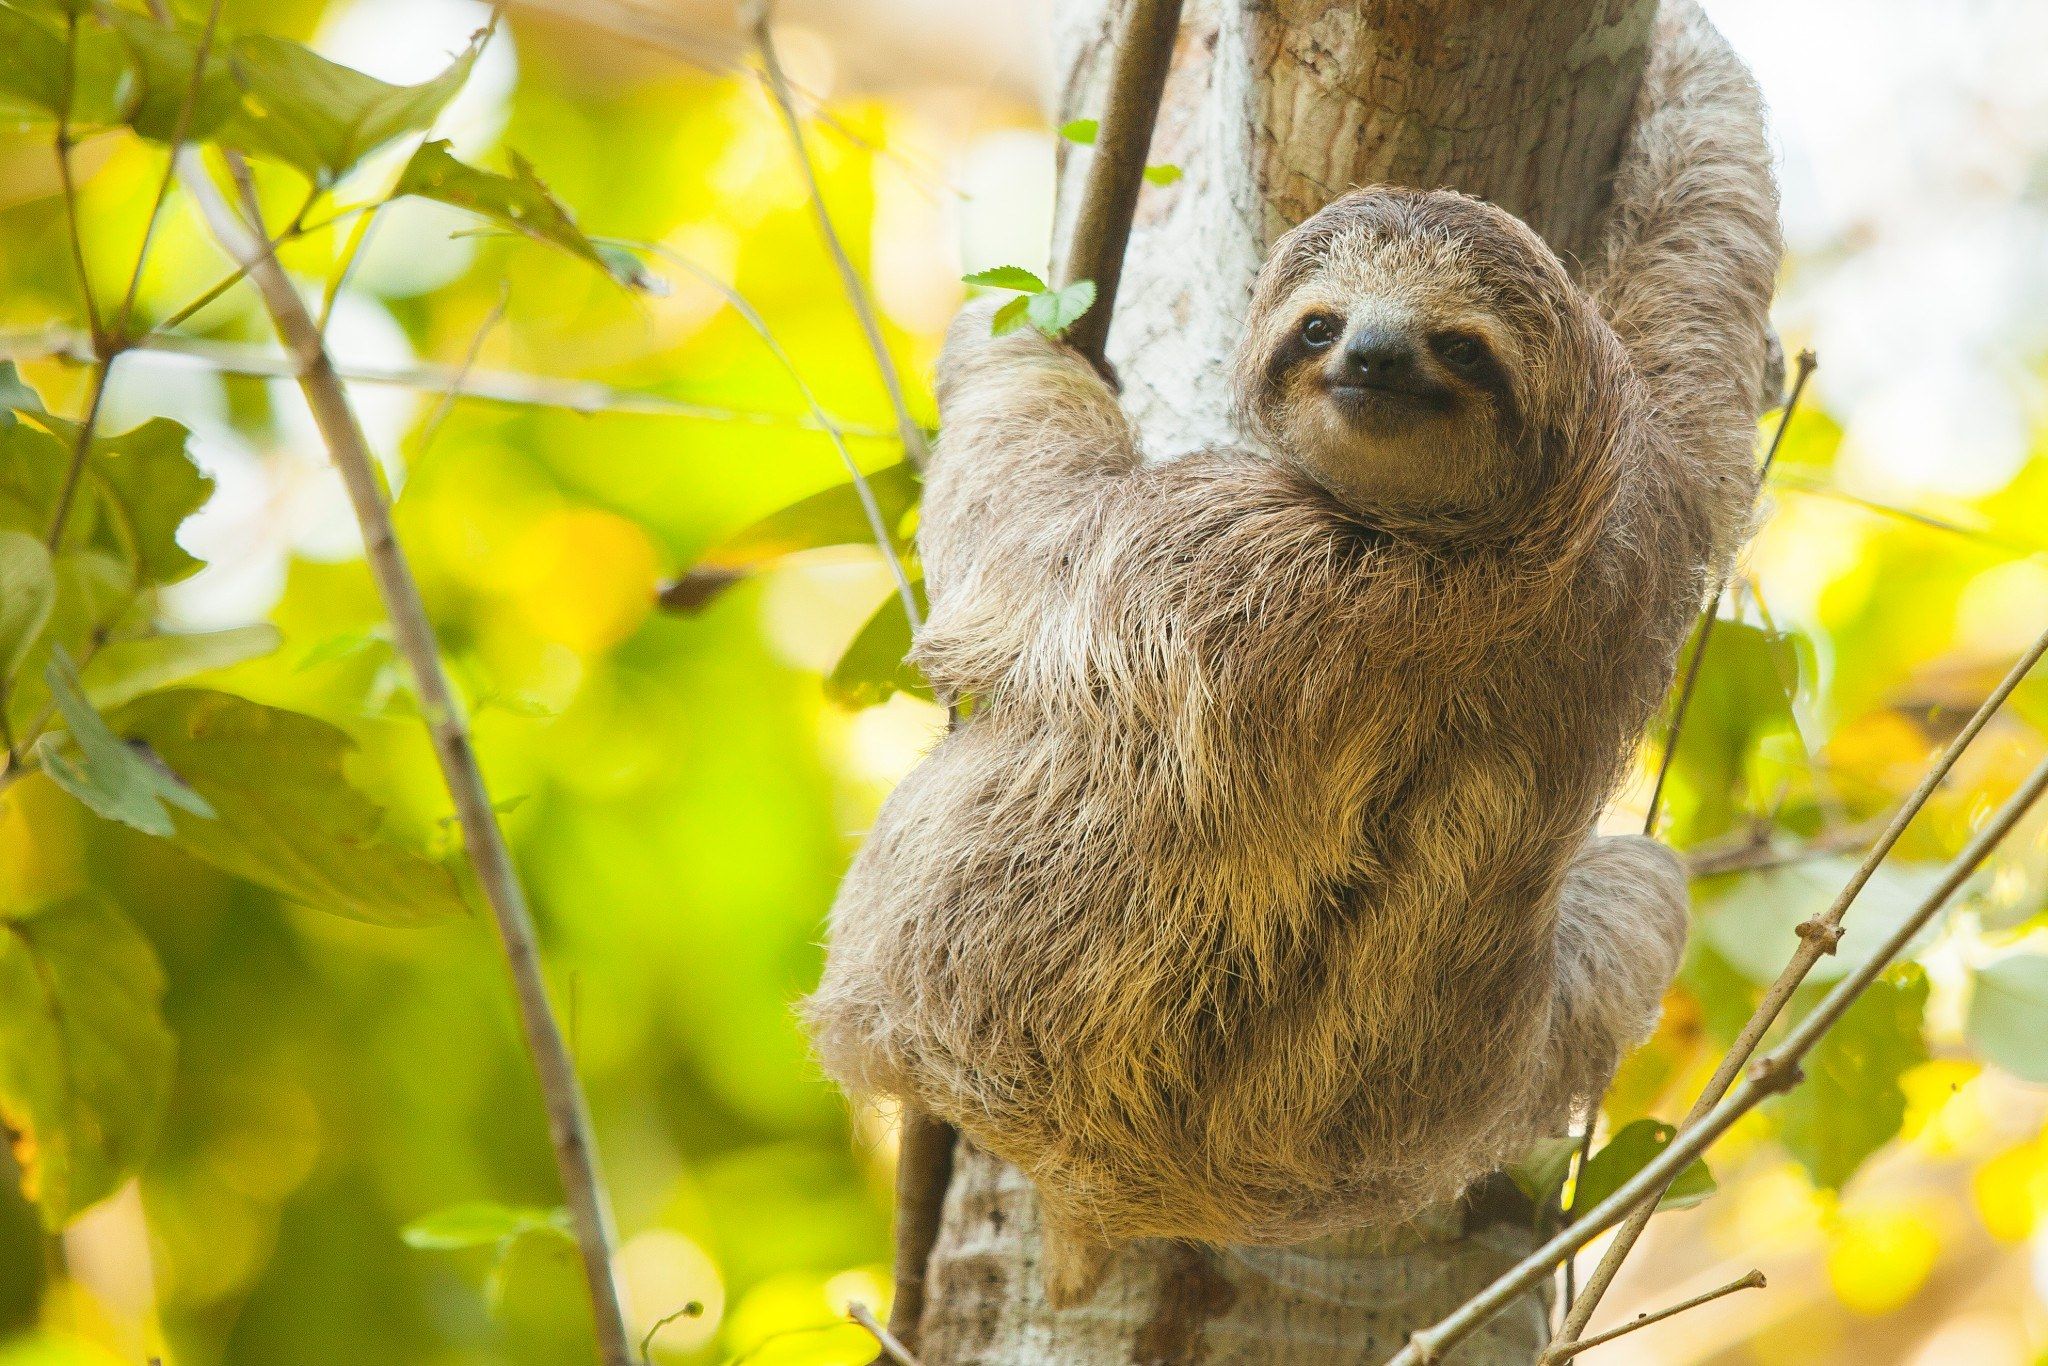 A sloth in the trees in Lapa Rios, Costa Rica